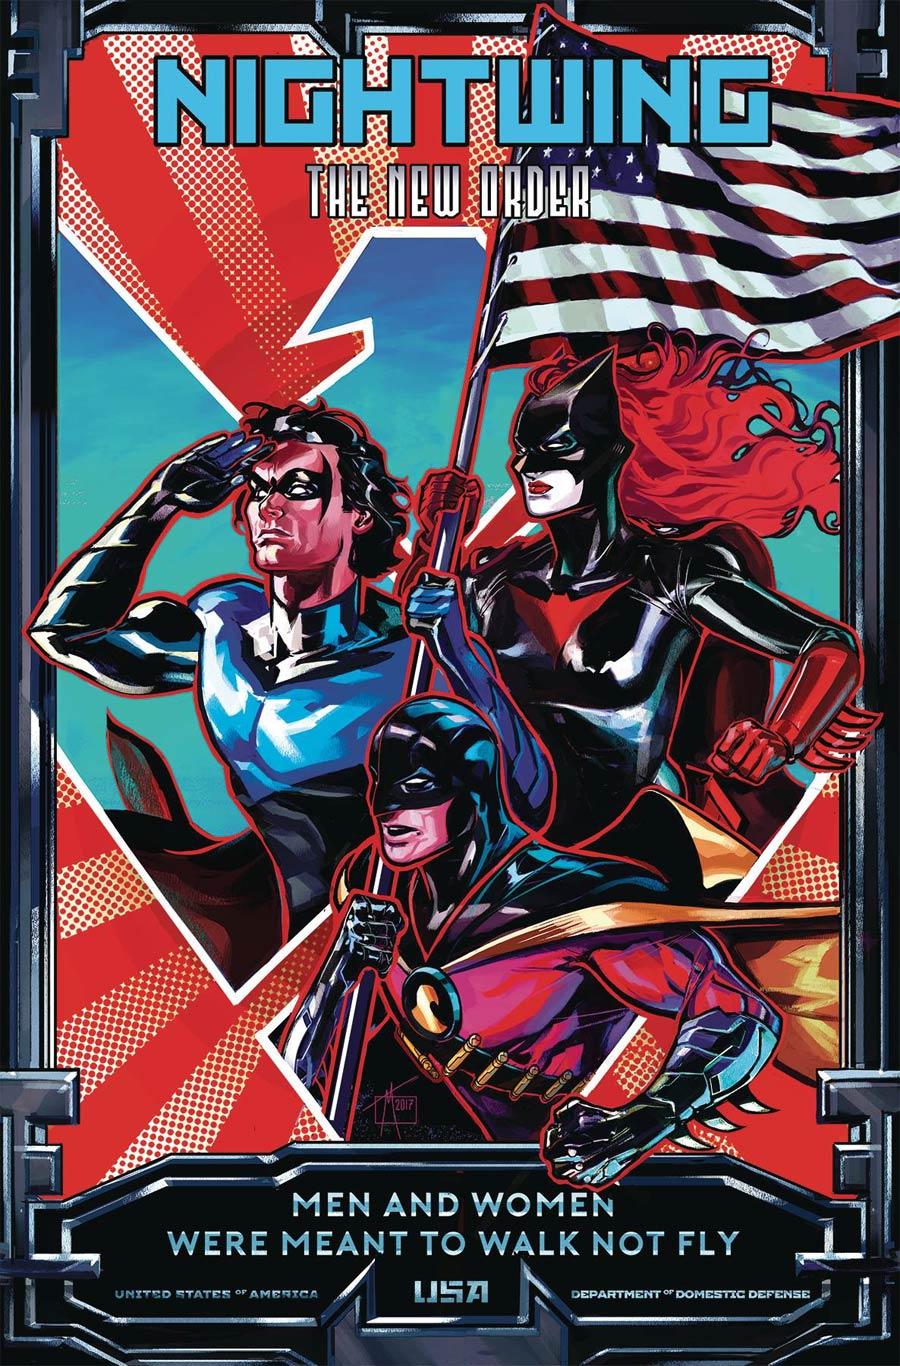 Nightwing The New Order Vol. 1 #3